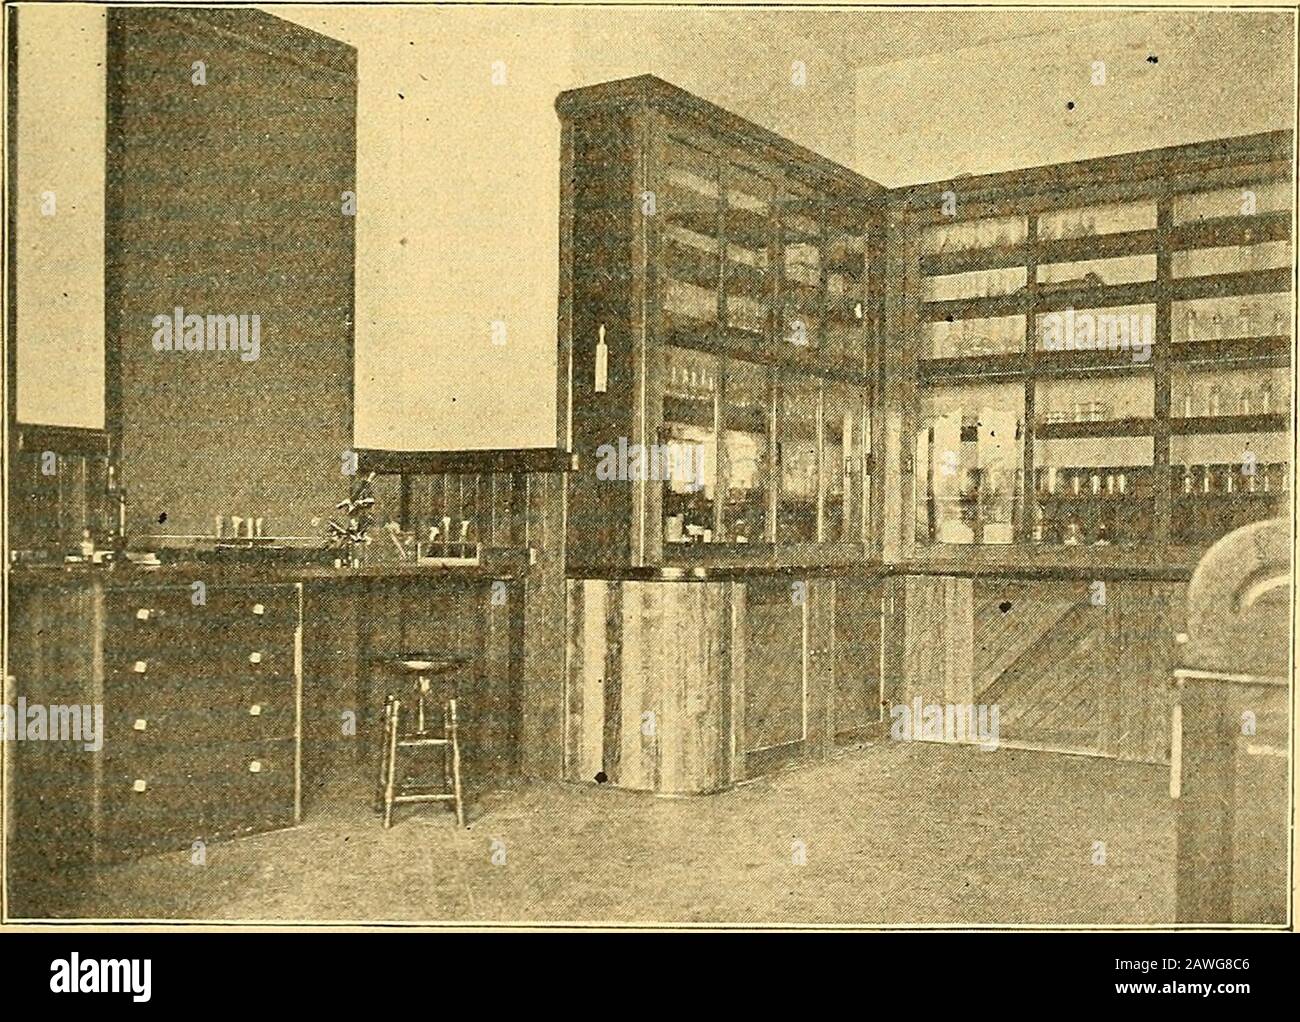 Annual report of the Storrs Agricultural Experiment Station, Storrs, Conn . Fig. 3. Cold Storage Chamber of Dairy Bacteriology Laboratory.. Fig. 4.Storage Shelves for Glassware in Dairy Bacteriology Laboratory. 26 STORRS AGRICULTURAL EXPERIMENT STATION. Room No. 3. Sections of this room can be seen in Figs. 3and 4. This room is practically the same size as No. 1 andis fitted with glass cases in which glassware may be storedaway from the dust. This room is separated from room No. 1and can be kept quite cool; and it is in this room that most ofthe real investigation work is done. Standing on the Stock Photo